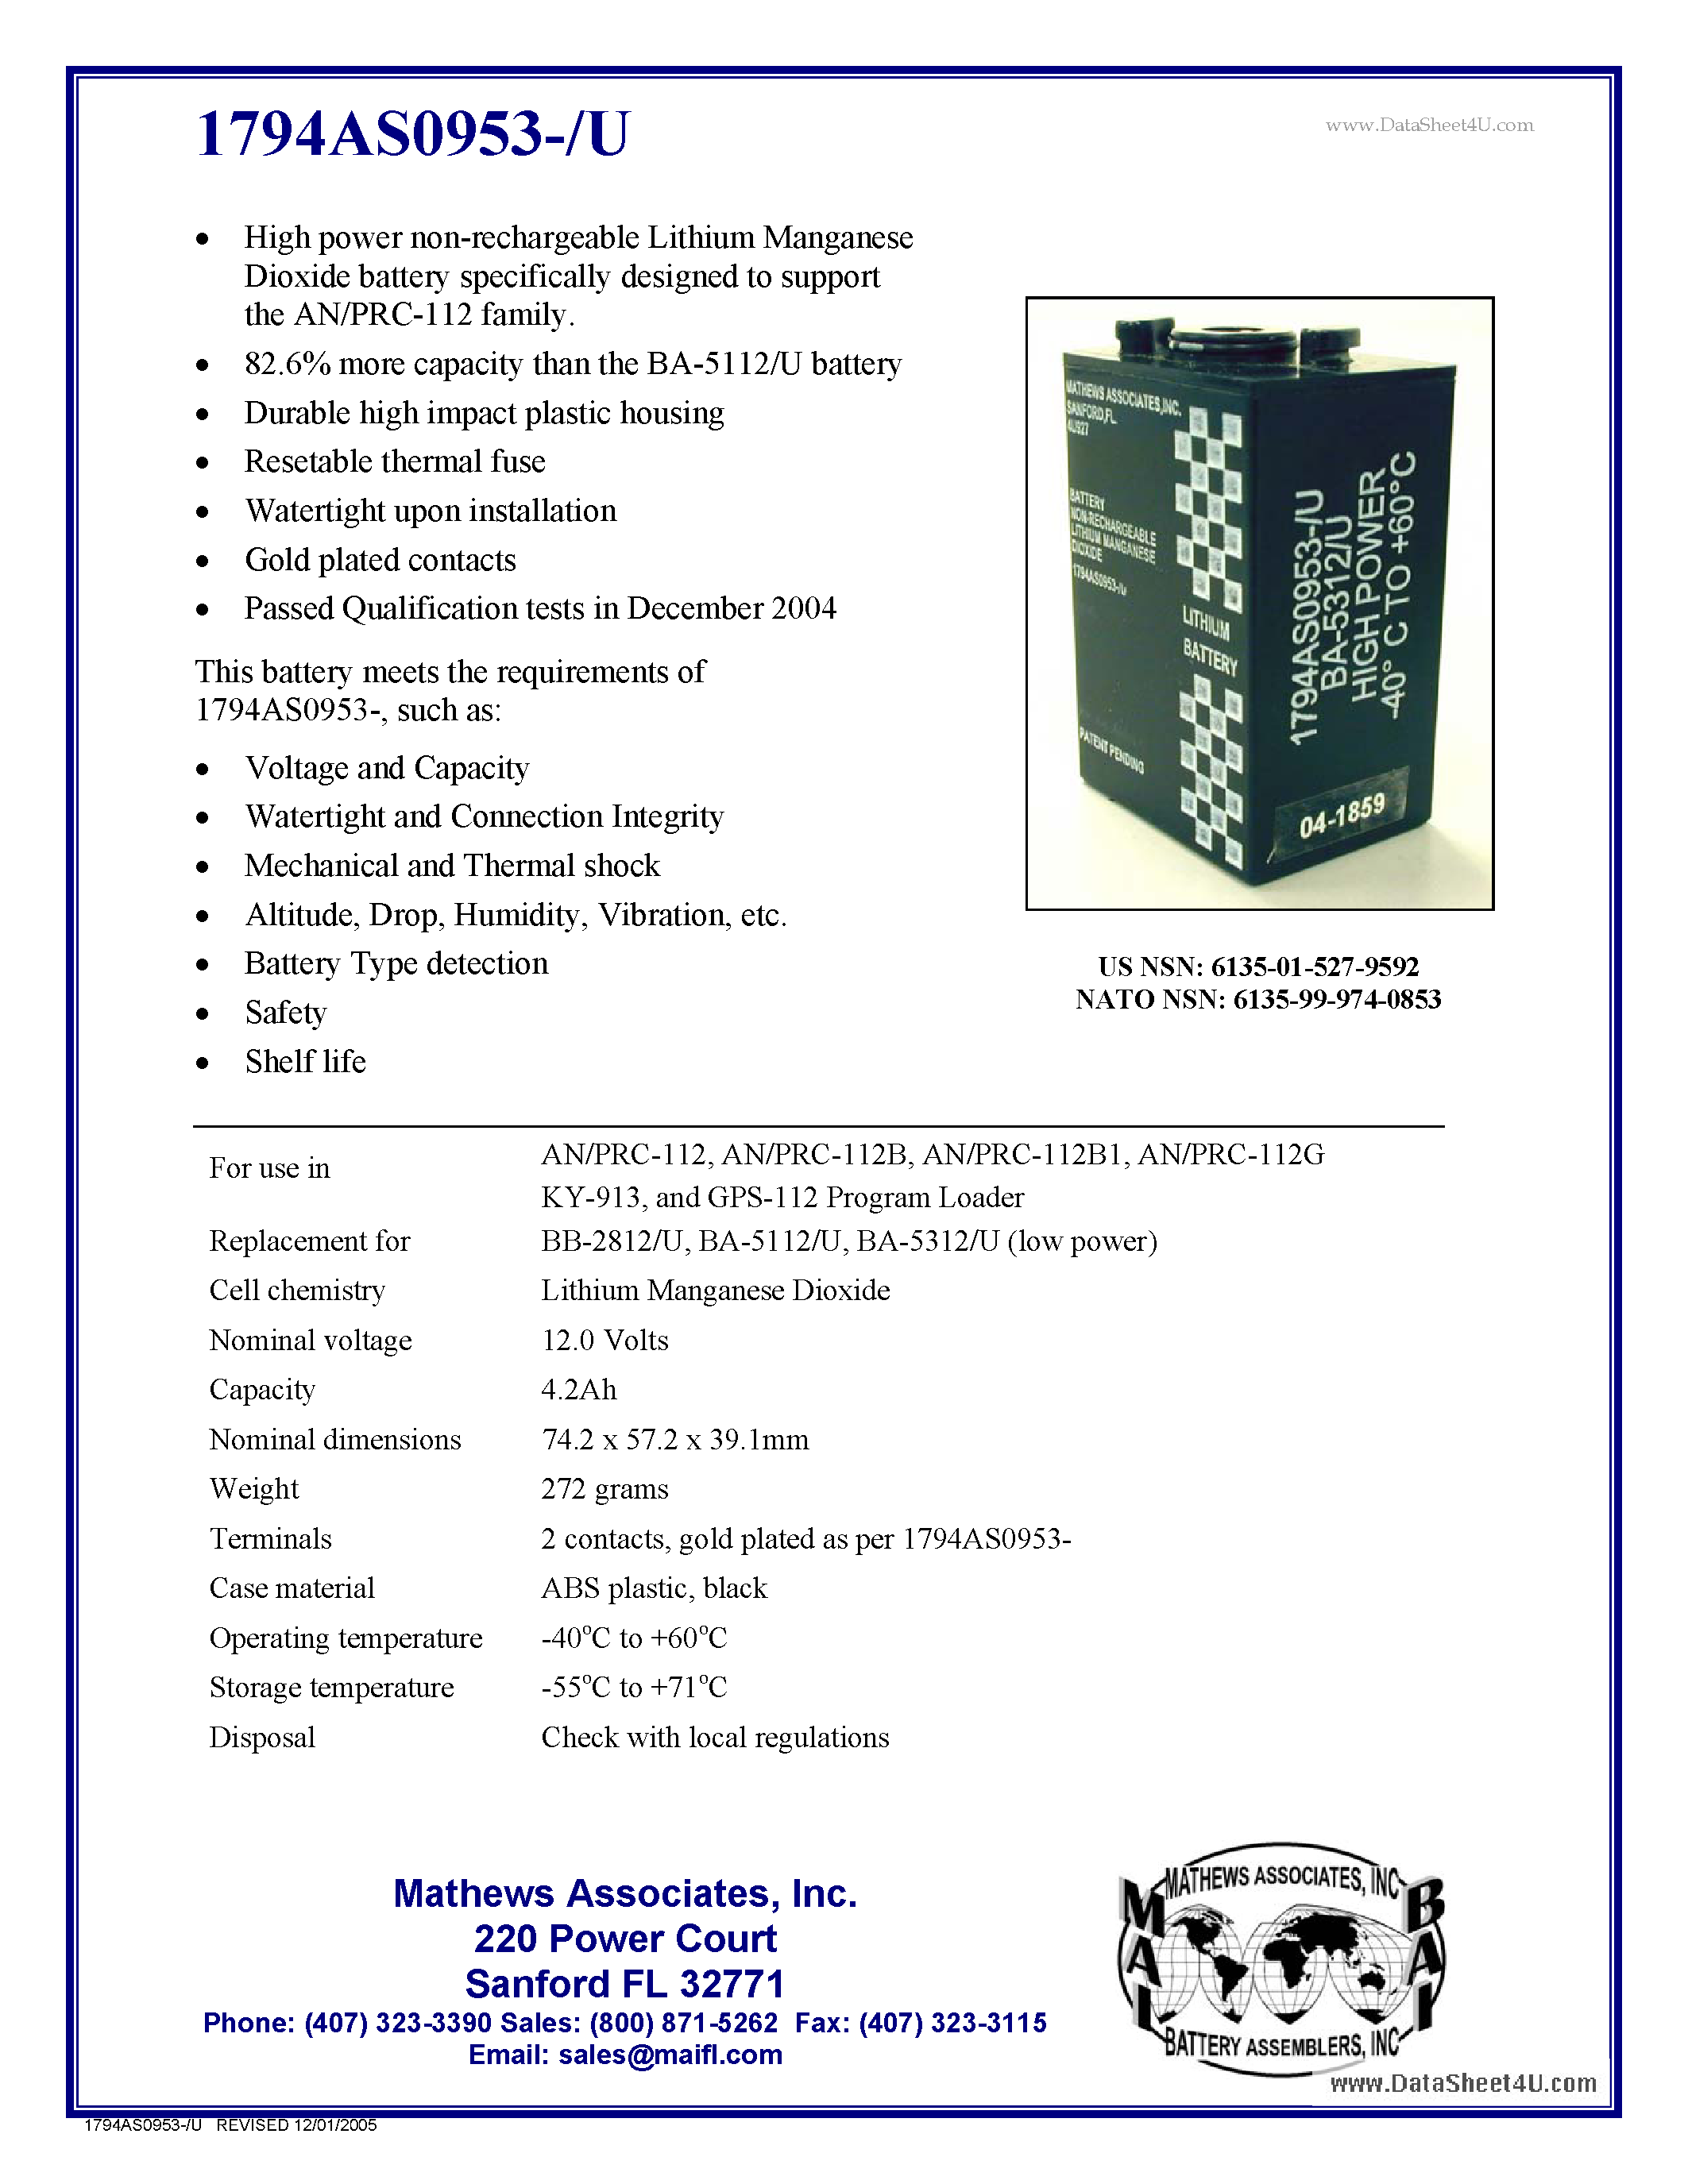 Datasheet 1794AS0953-/U - High power non-rechargeable Lithium Manganese Dioxide battery page 1